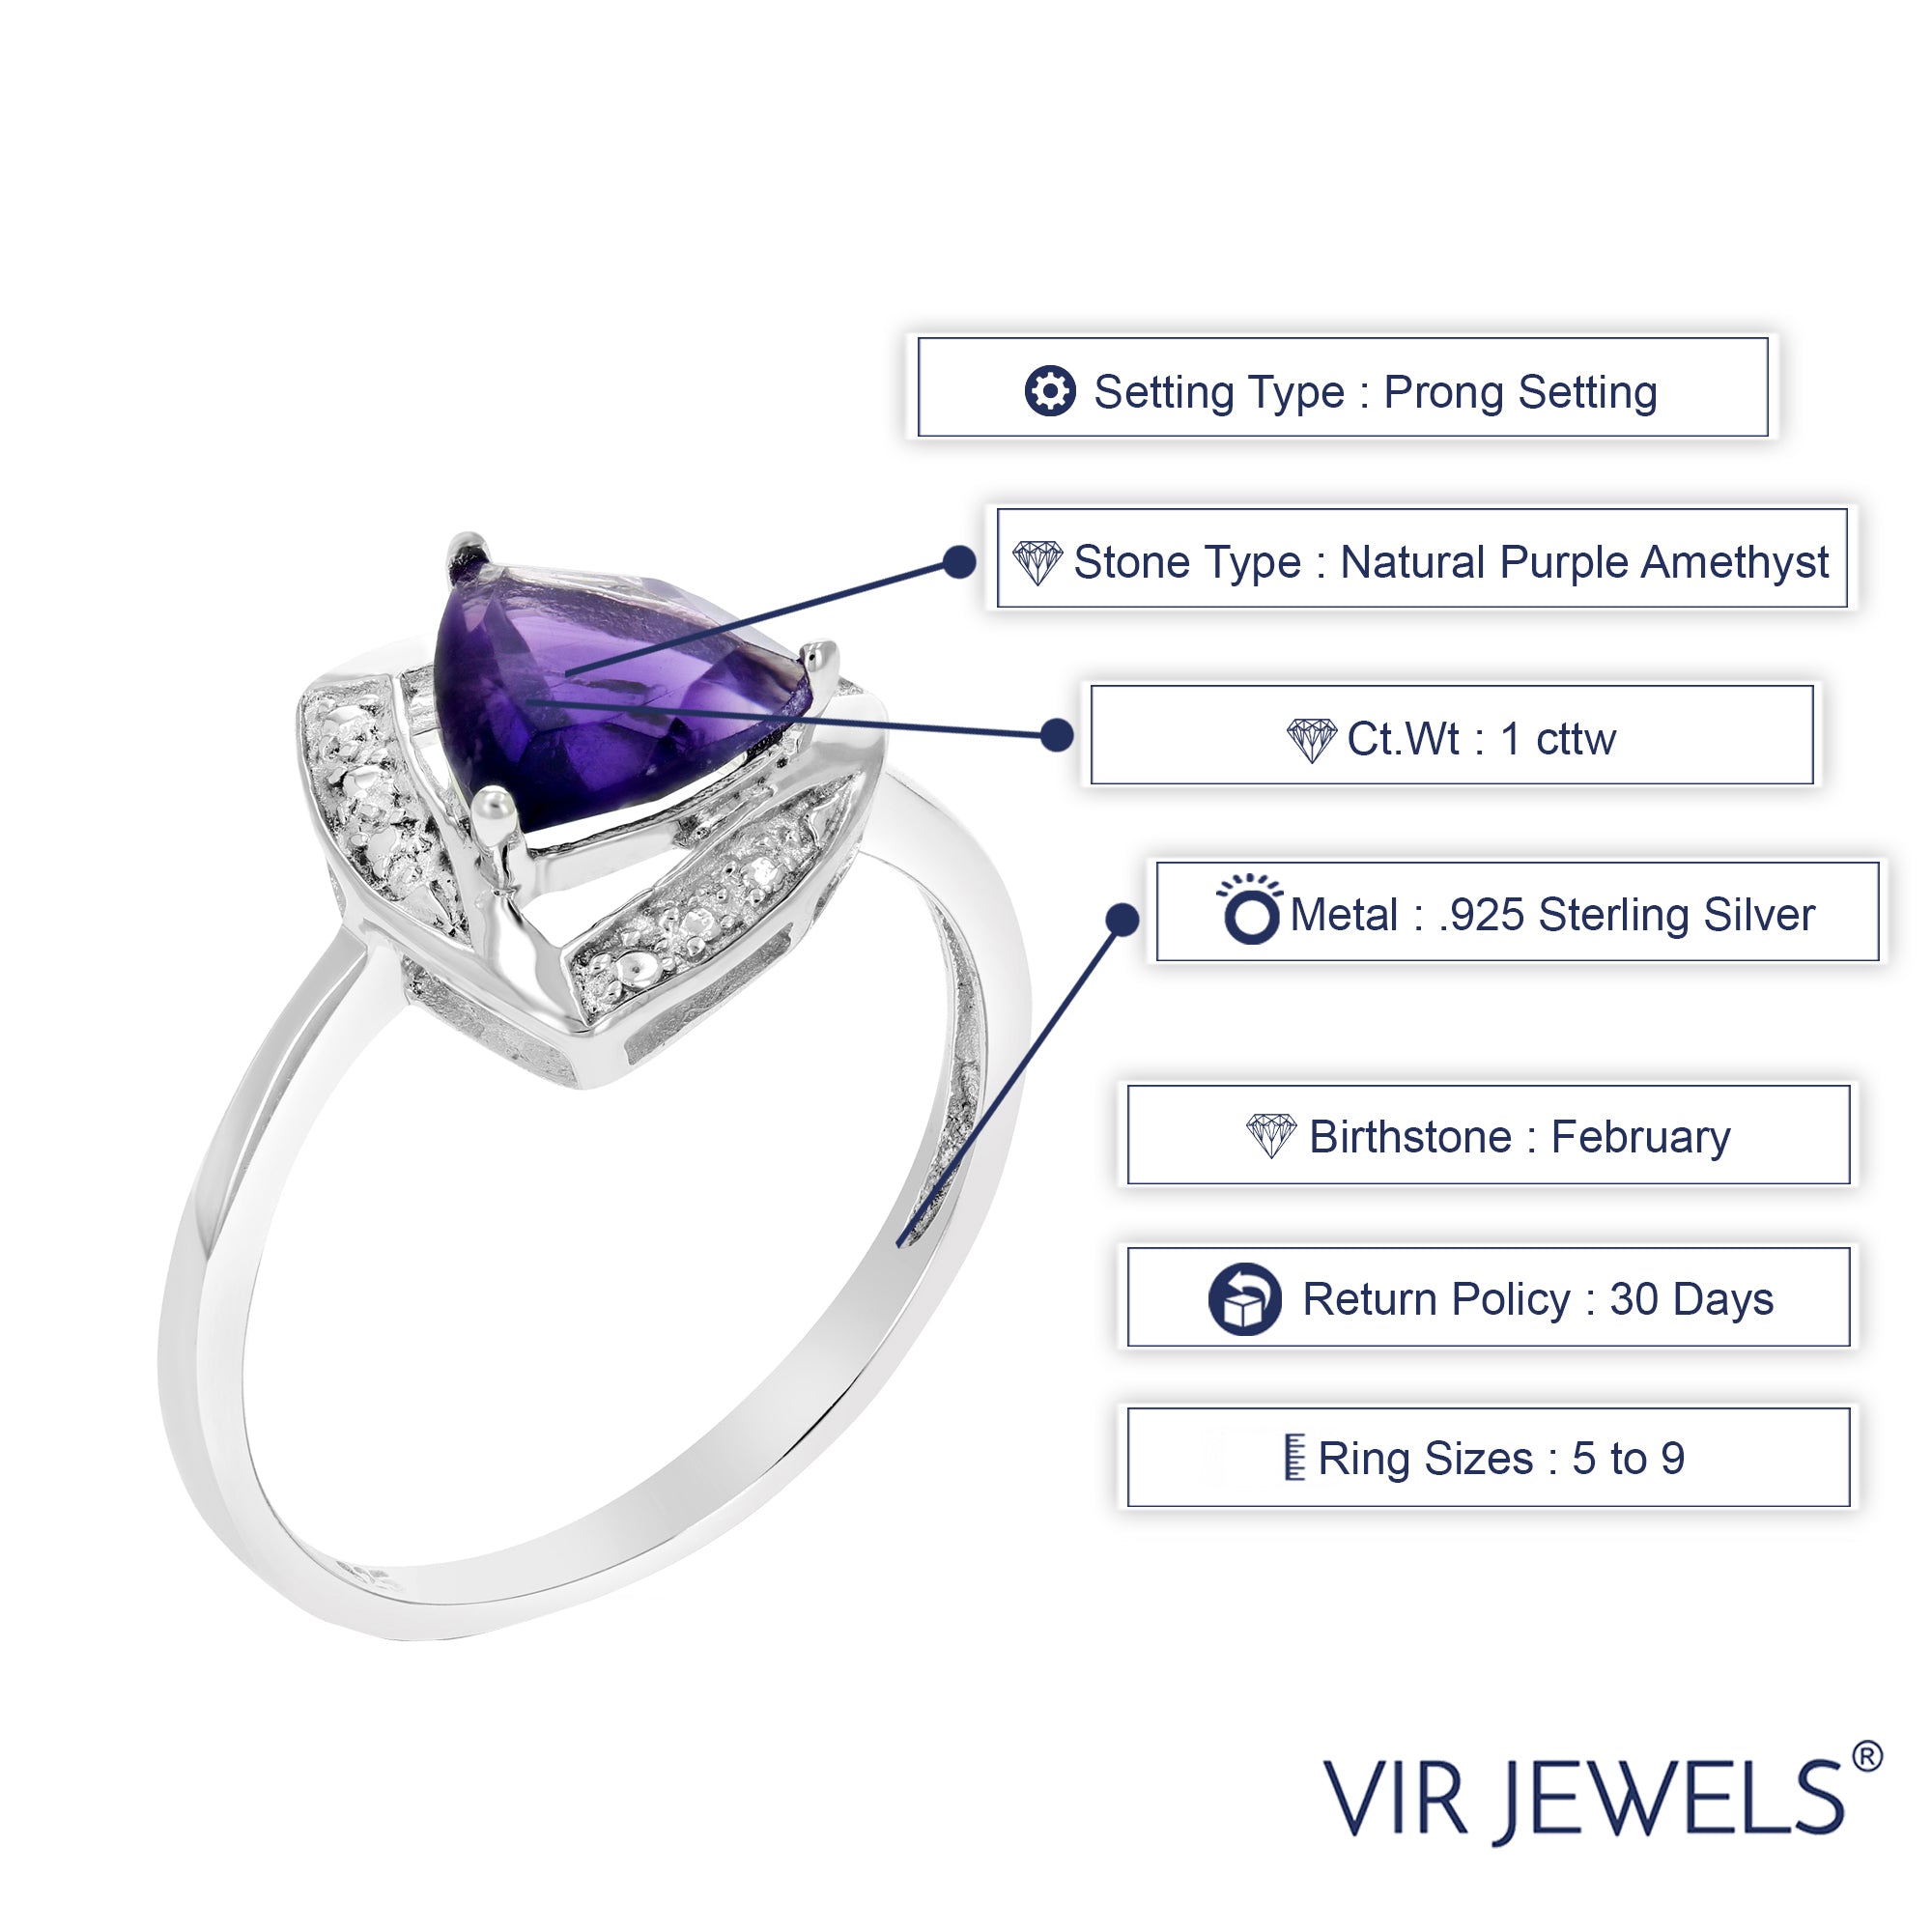 1 cttw Purple Amethyst Ring .925 Sterling Silver with Rhodium Triangle 7 MM